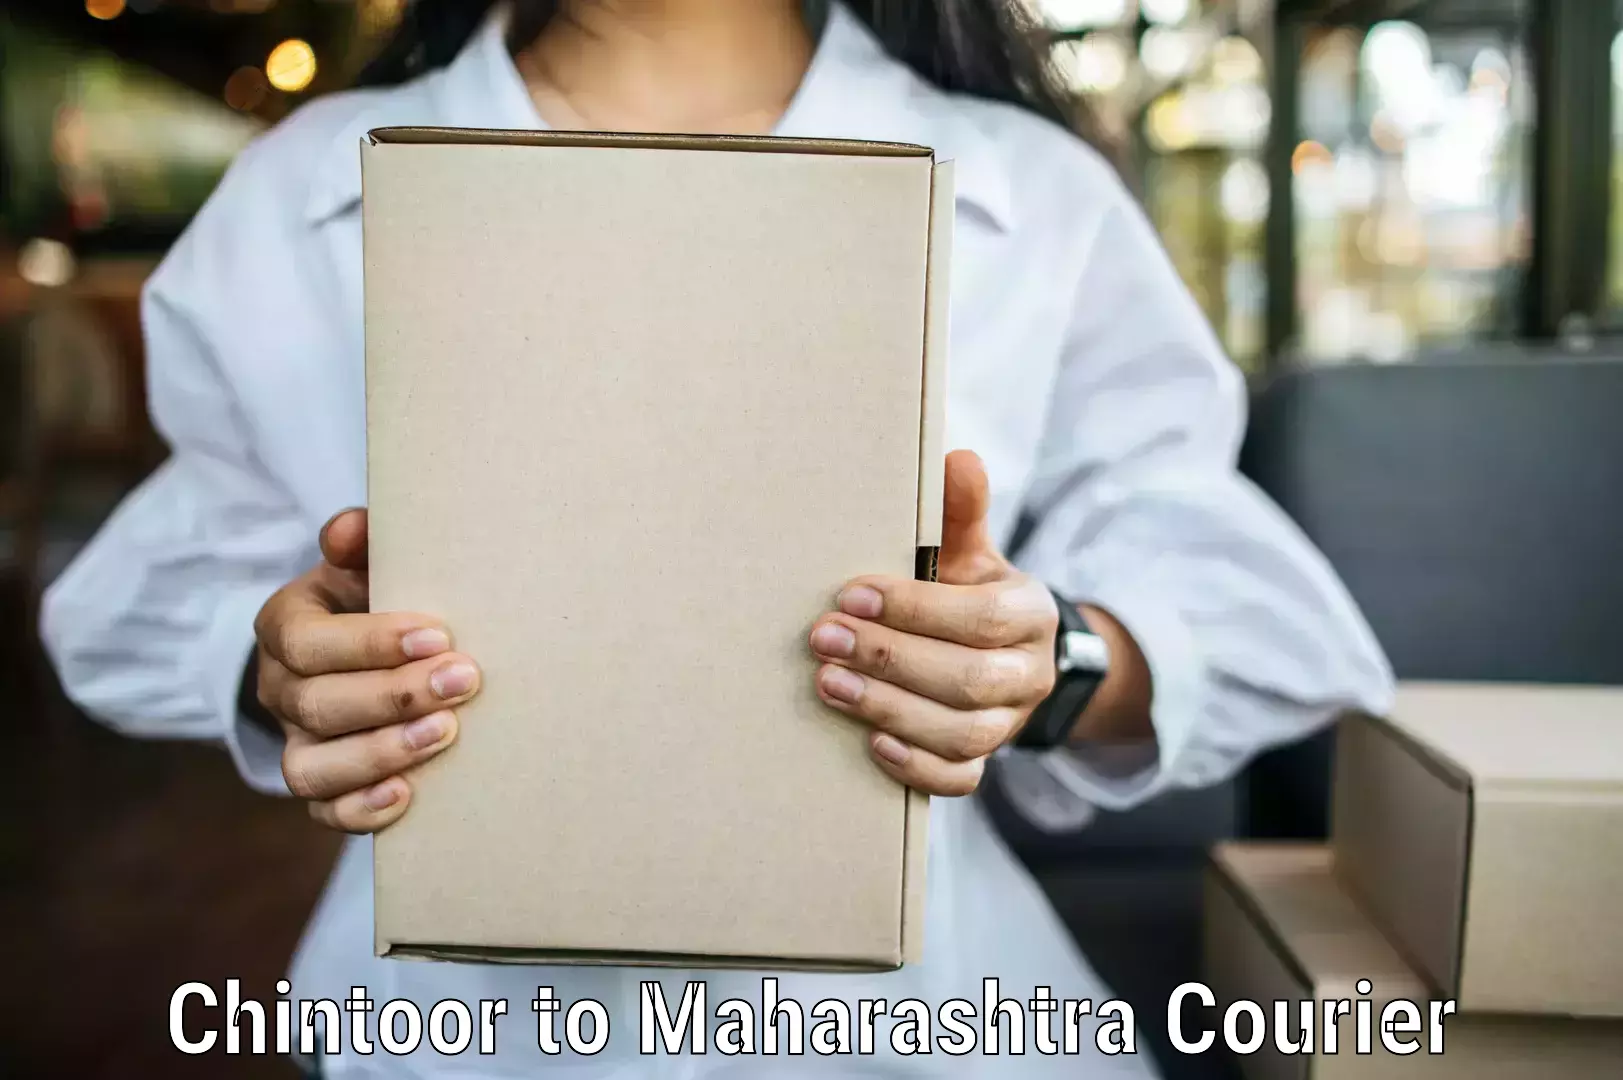 Reliable delivery network Chintoor to Maharashtra